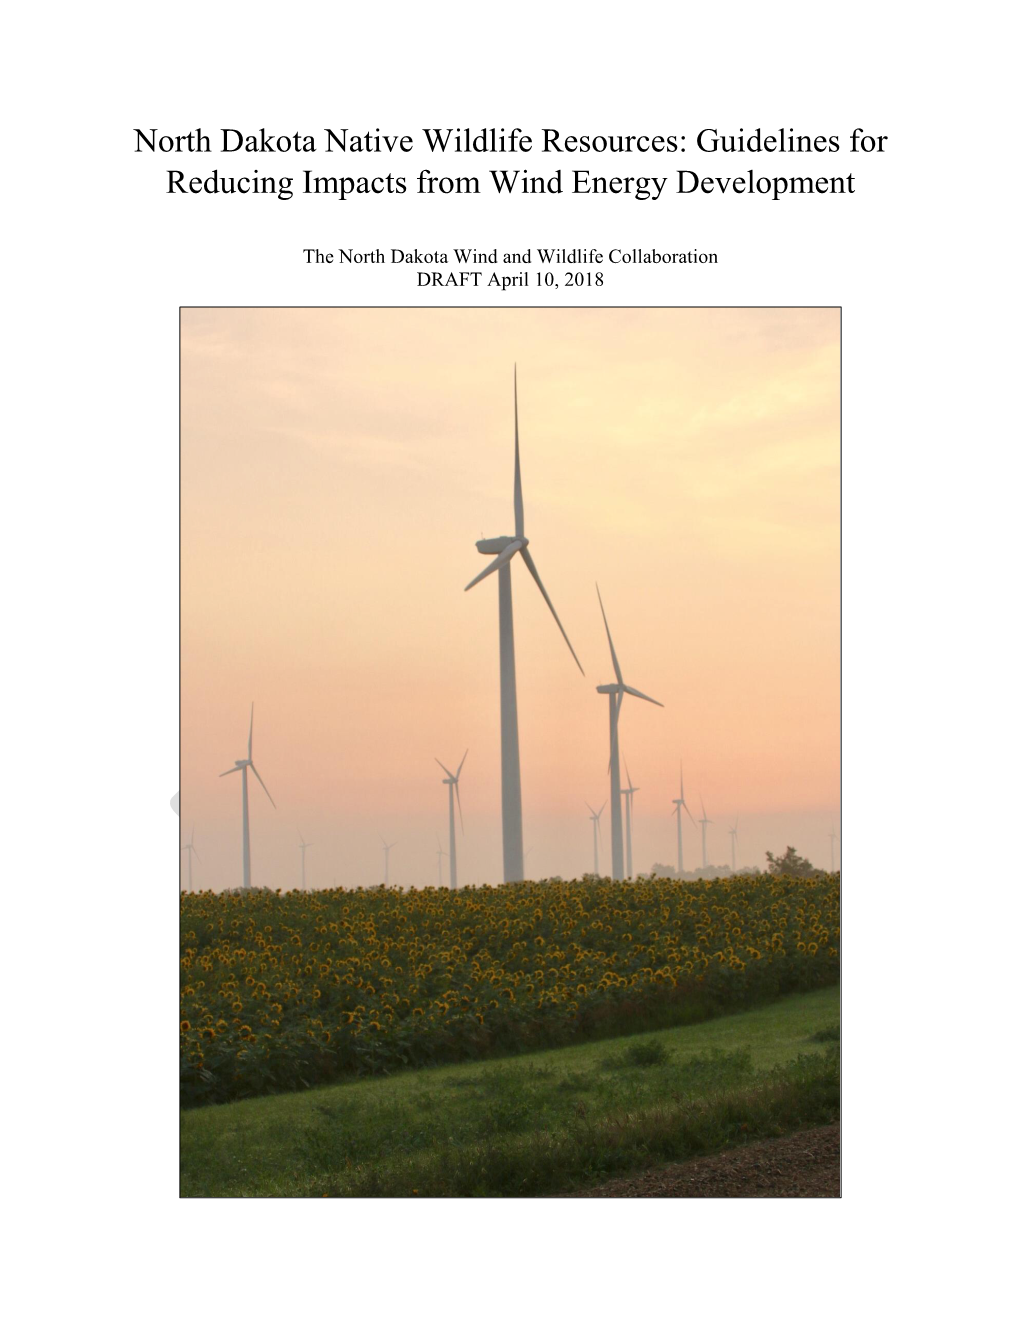 Guidelines for Reducing Impacts from Wind Energy Development